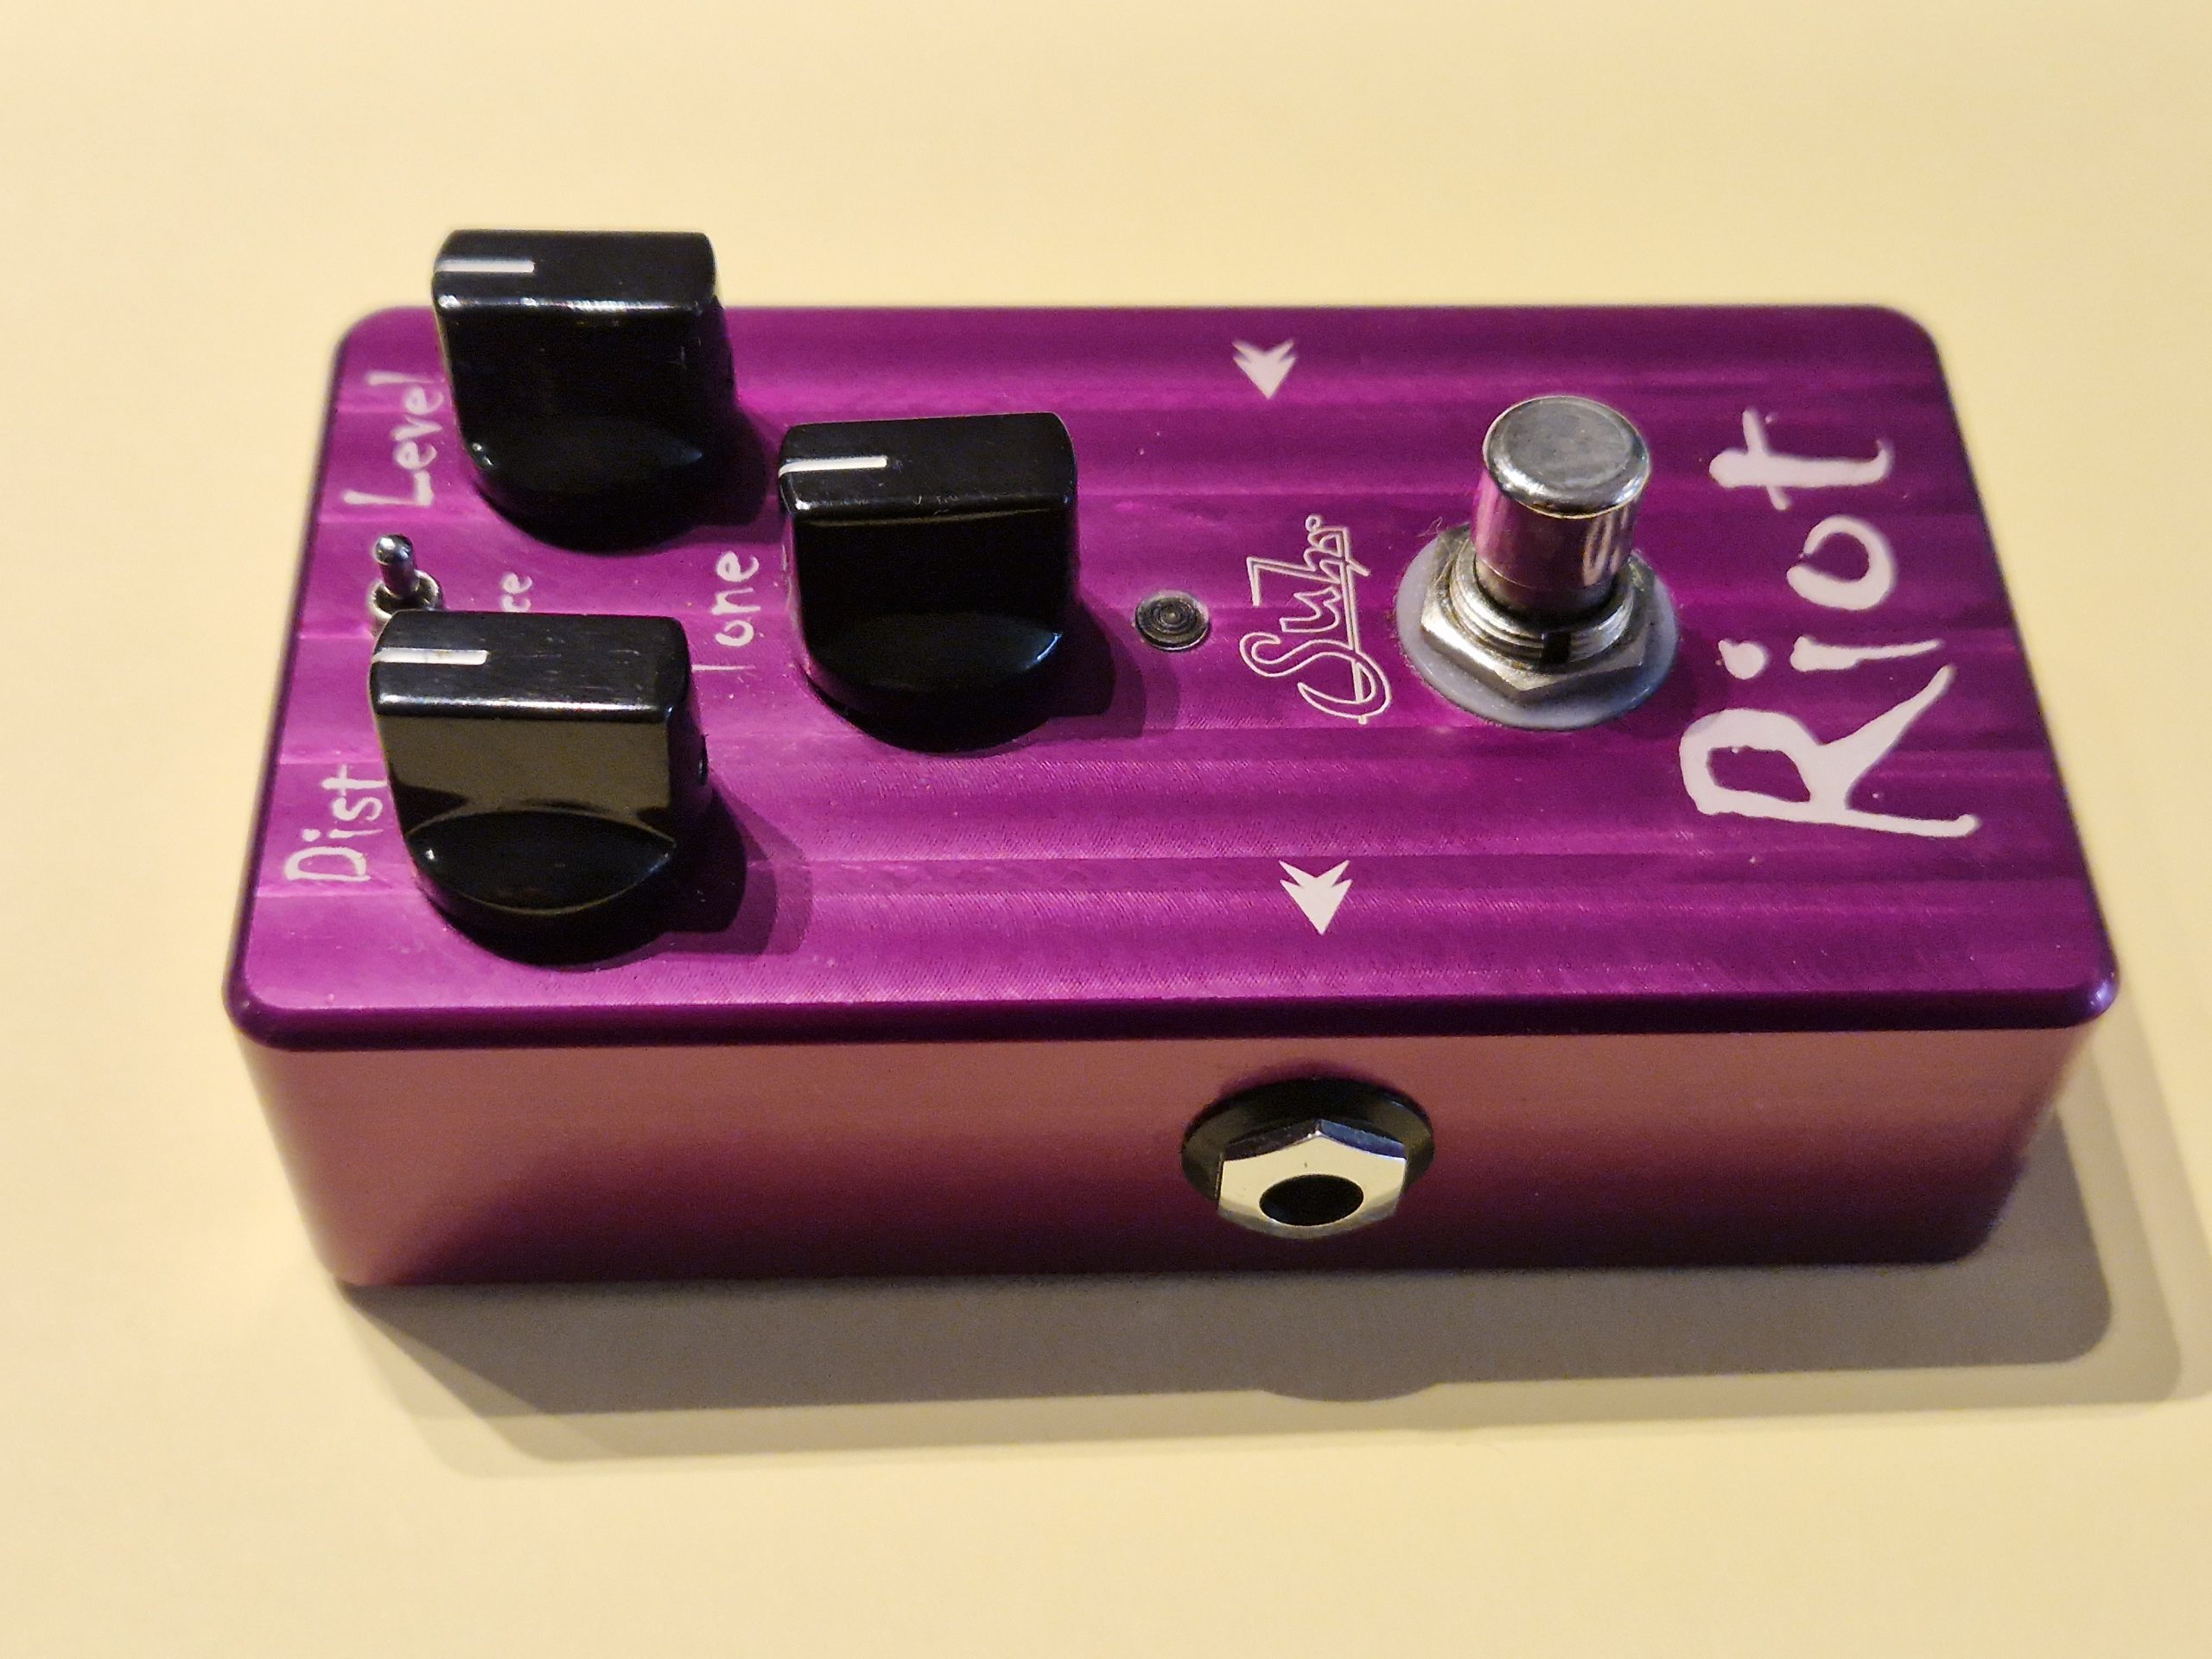 Suhr Riot - Effects Pedals